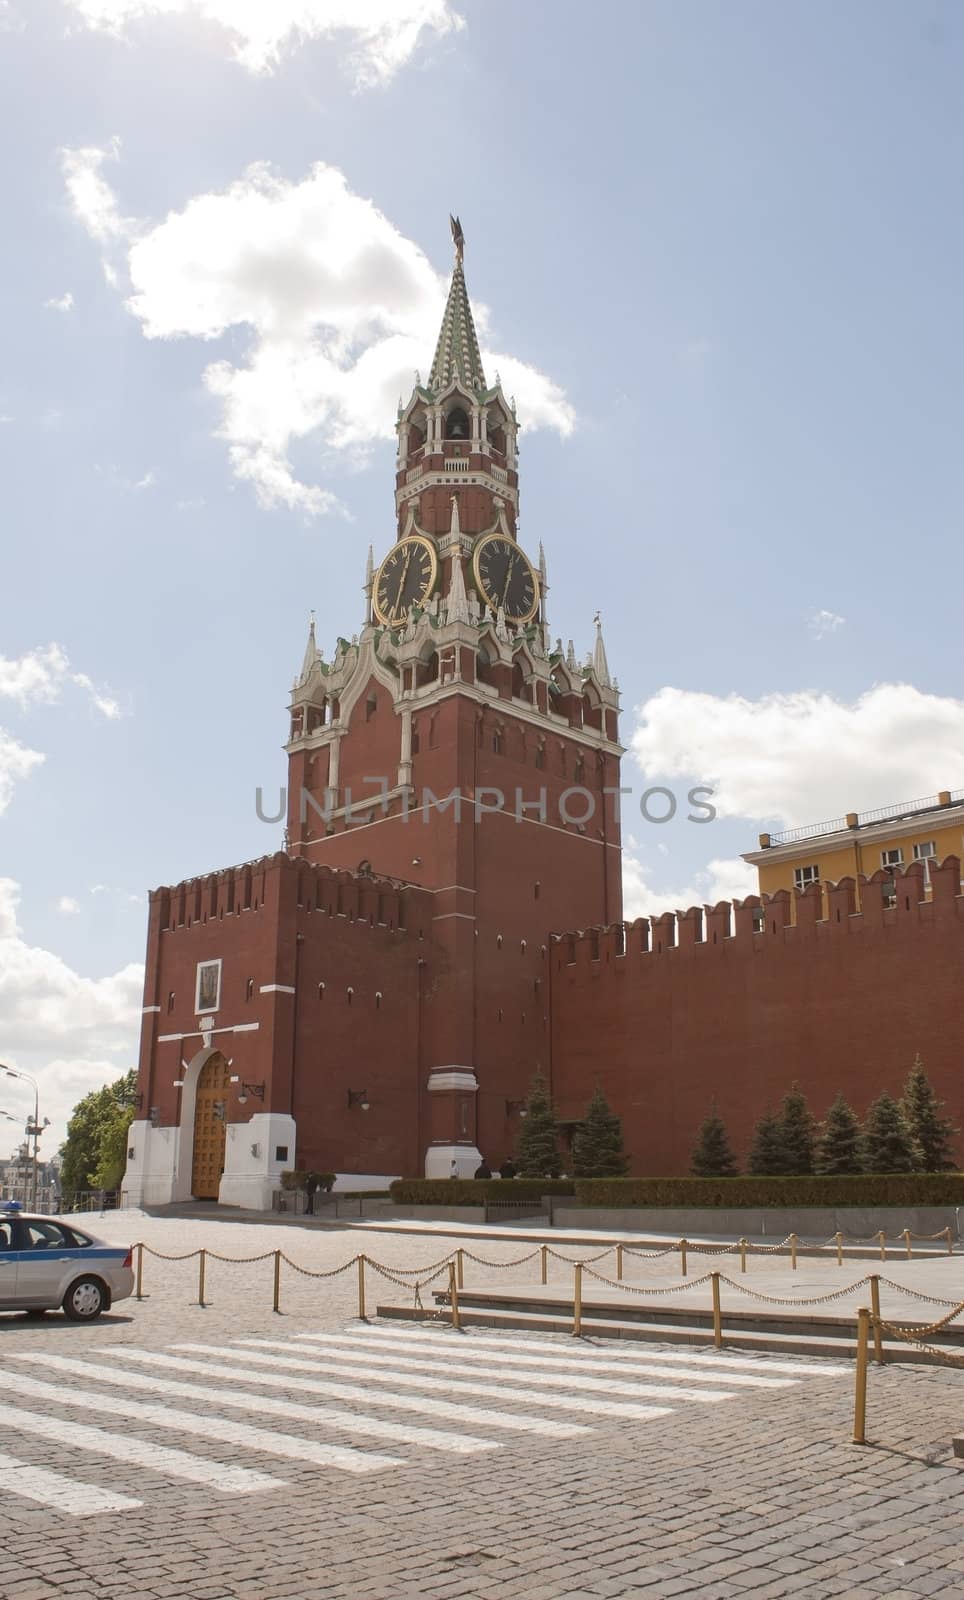 Spasskaya tower at Red Square in Moscow, Russia by AndreyKr